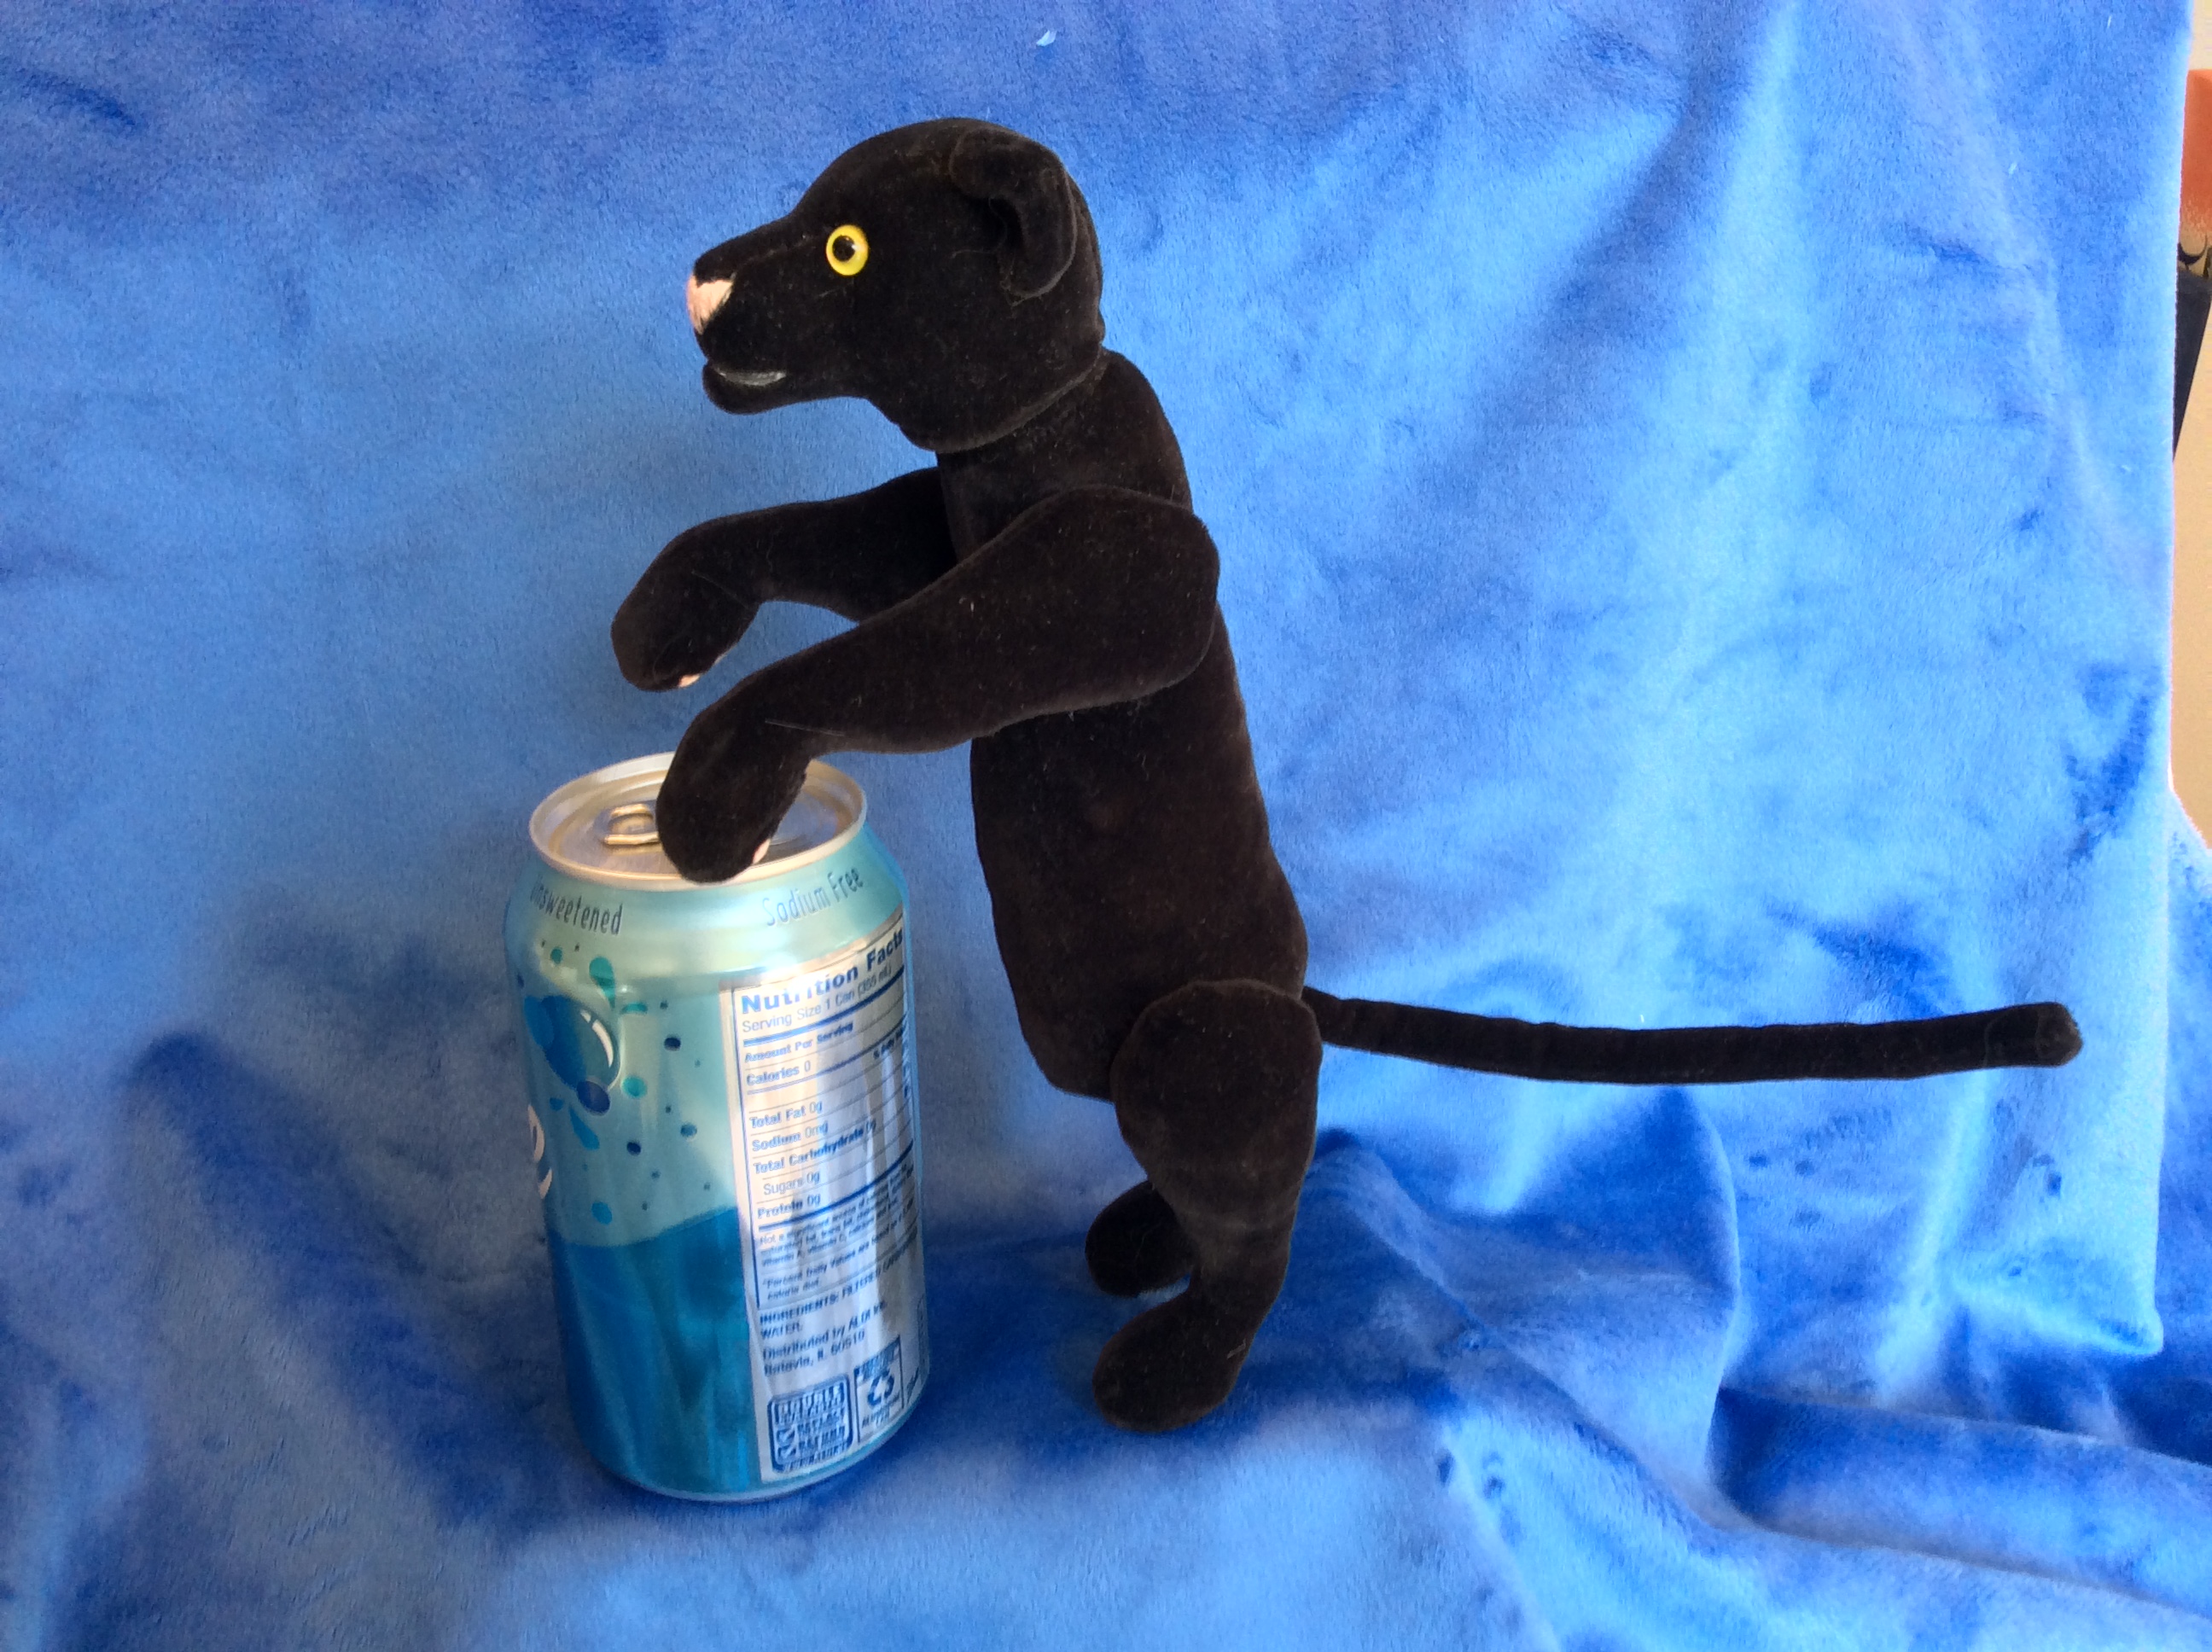 Black panther plush with seltzer for scale